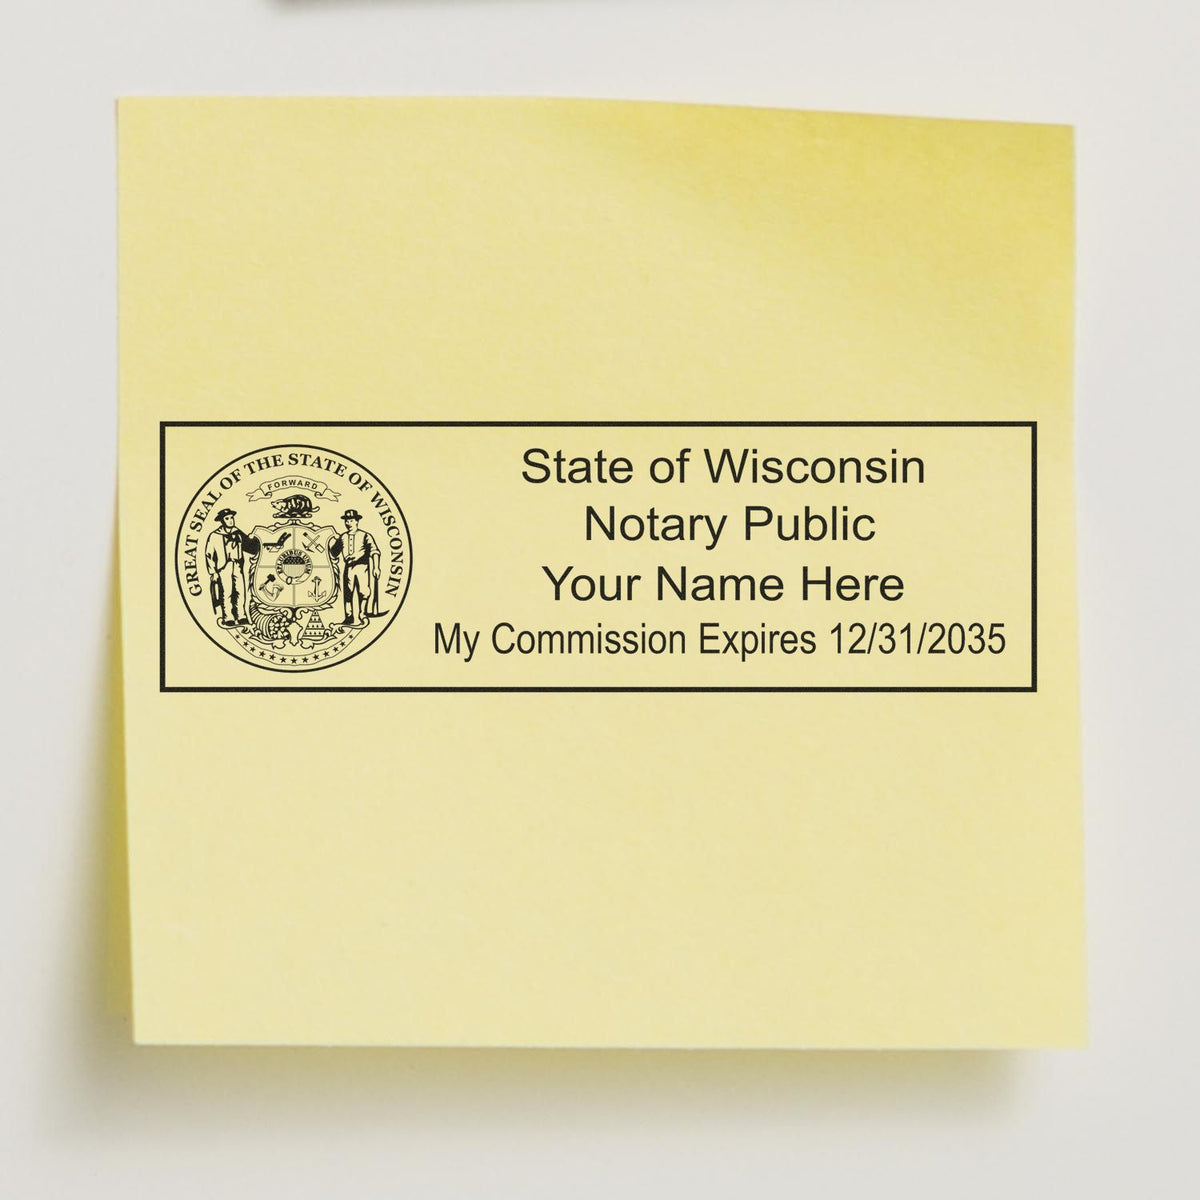 The Super Slim Wisconsin Notary Public Stamp stamp impression comes to life with a crisp, detailed photo on paper - showcasing true professional quality.